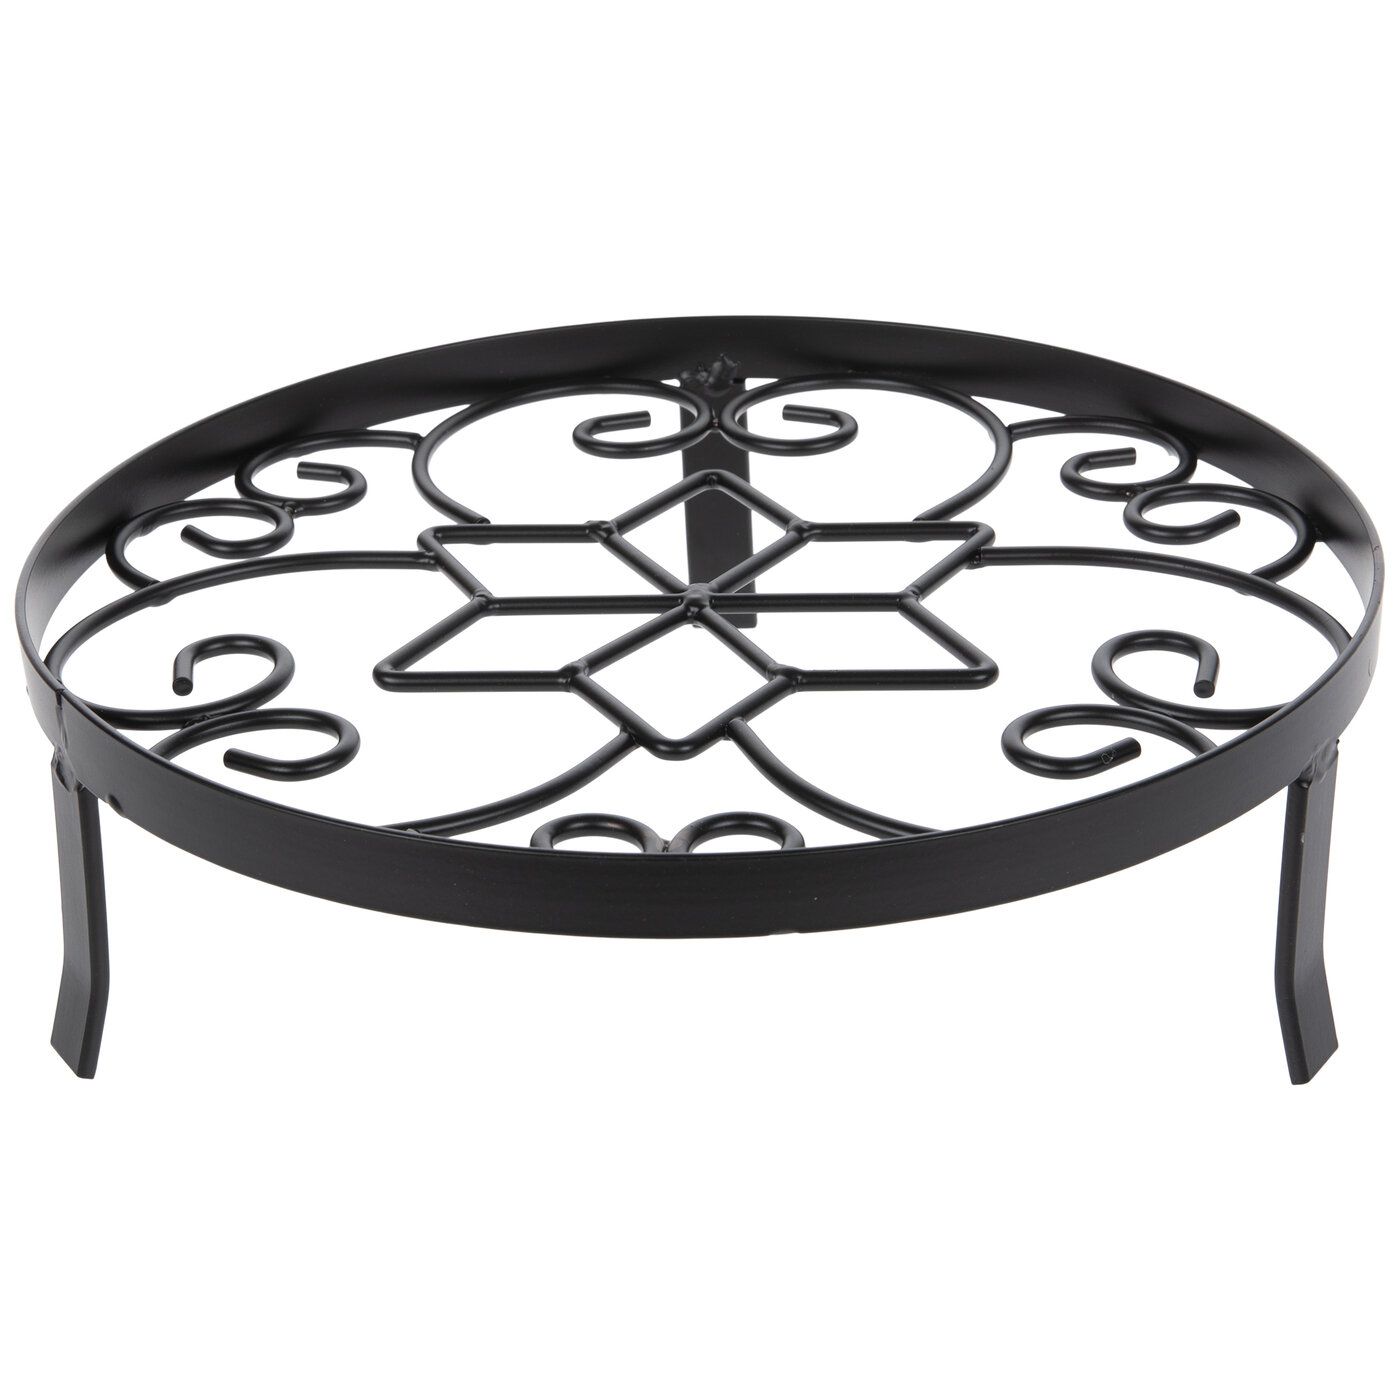 Black Star & Heart Metal Plant Stand | Hobby Lobby | 5485982 With Metal Plant Stands (View 9 of 15)